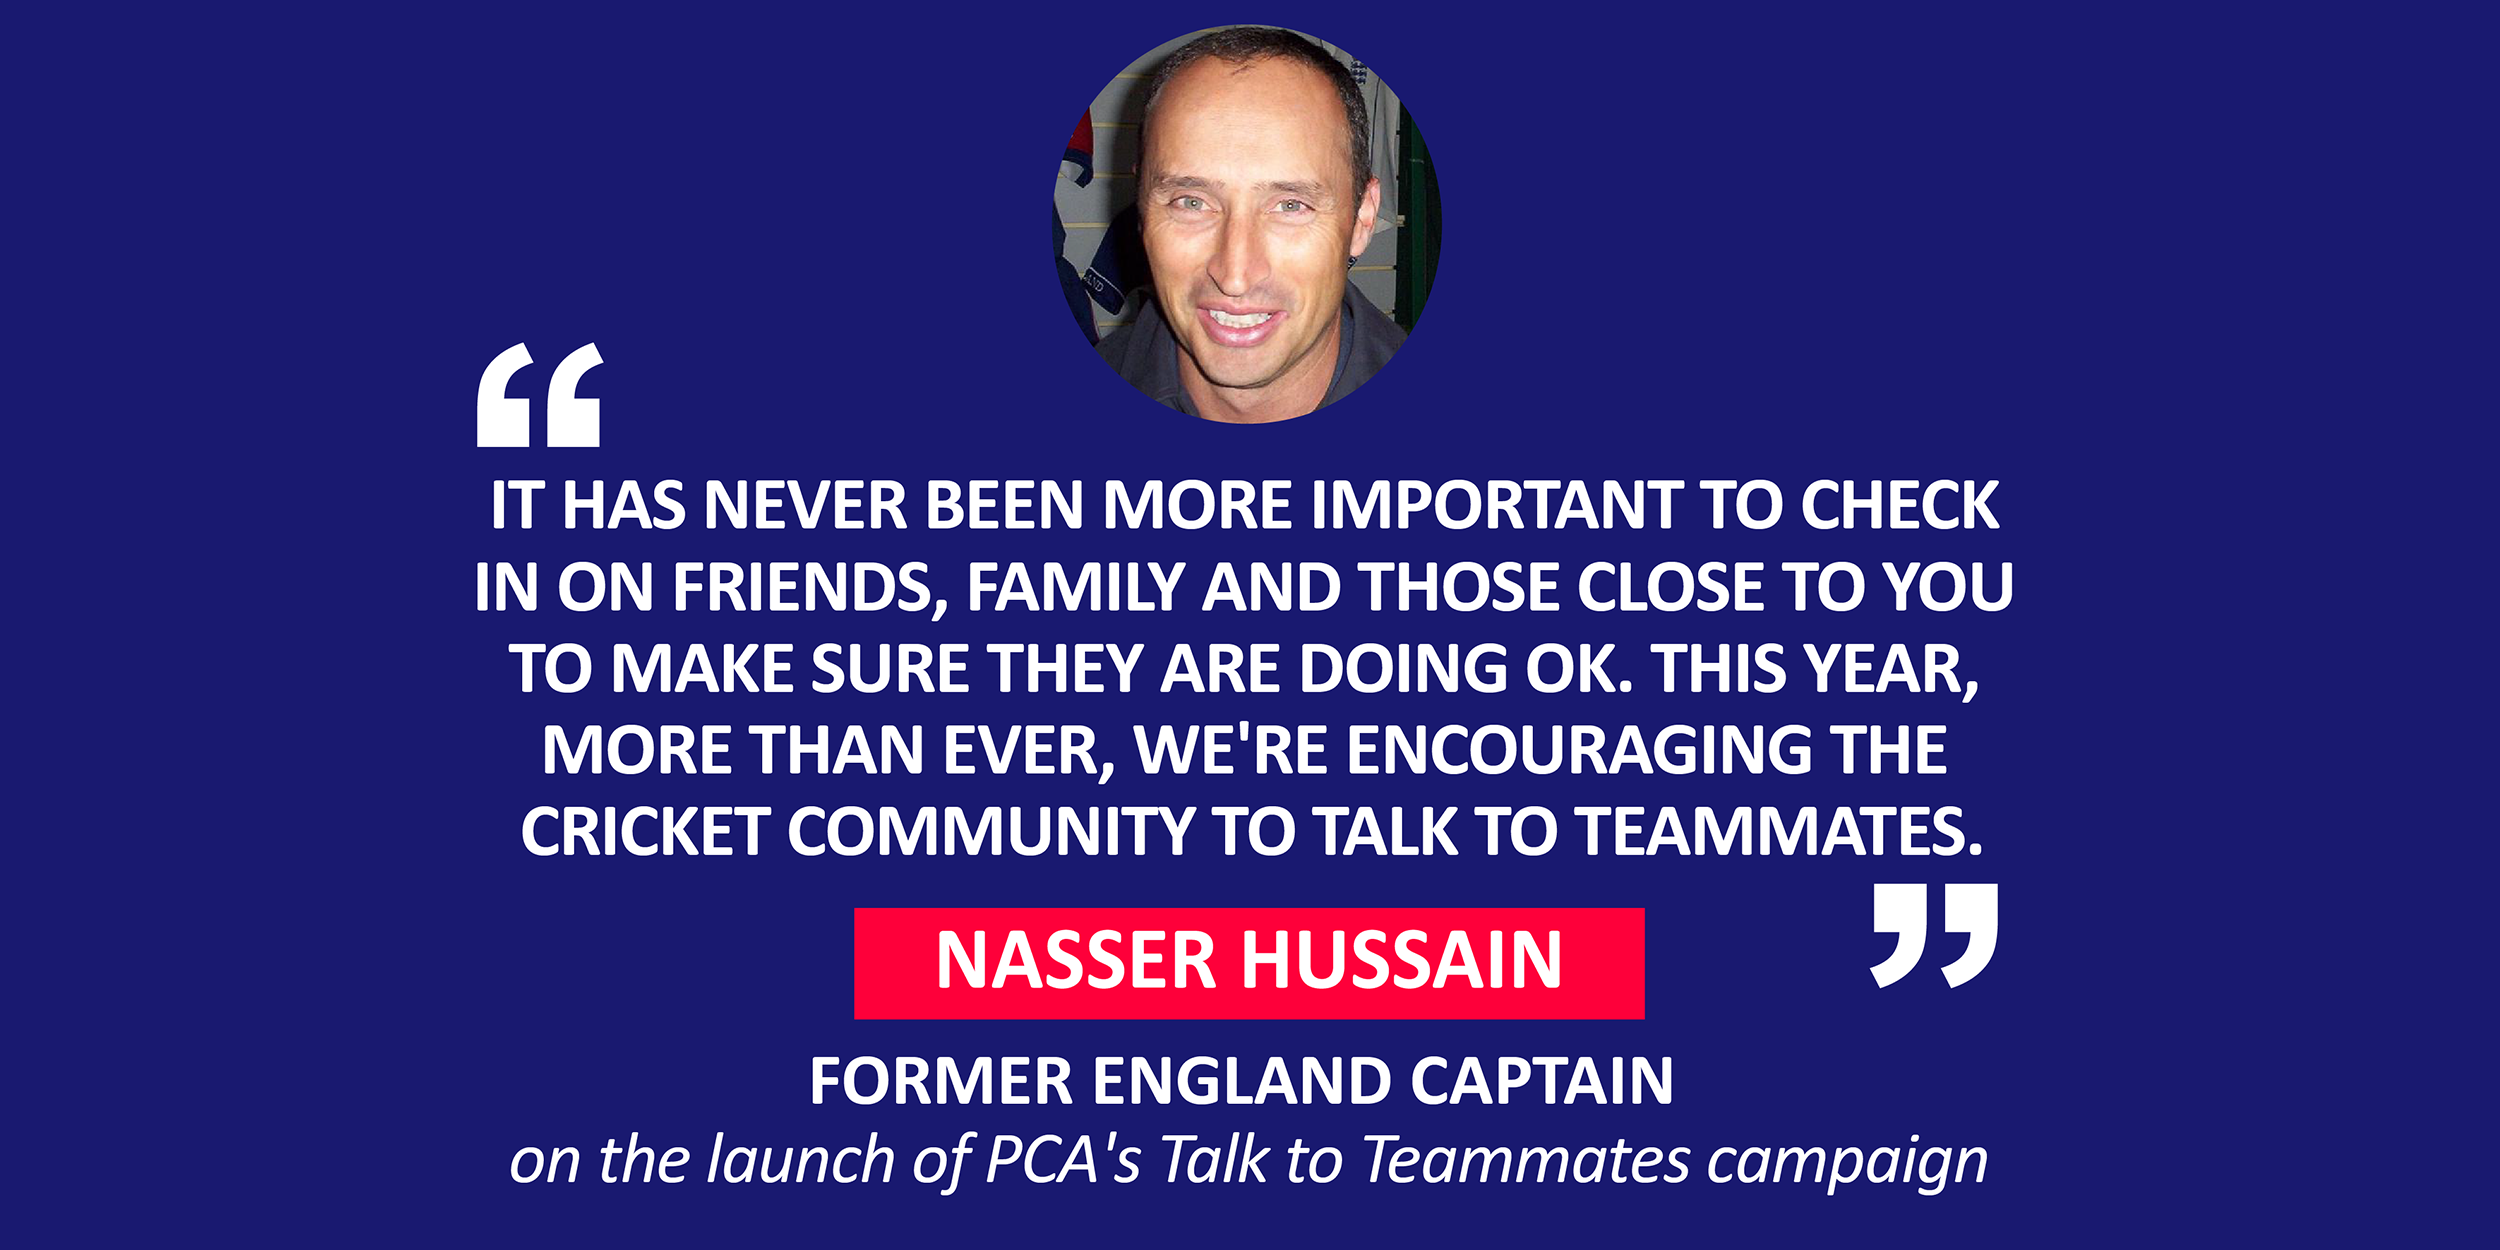 Nasser Hussain, Former England Captain on the launch of PCA's Talk to Teammates campaign